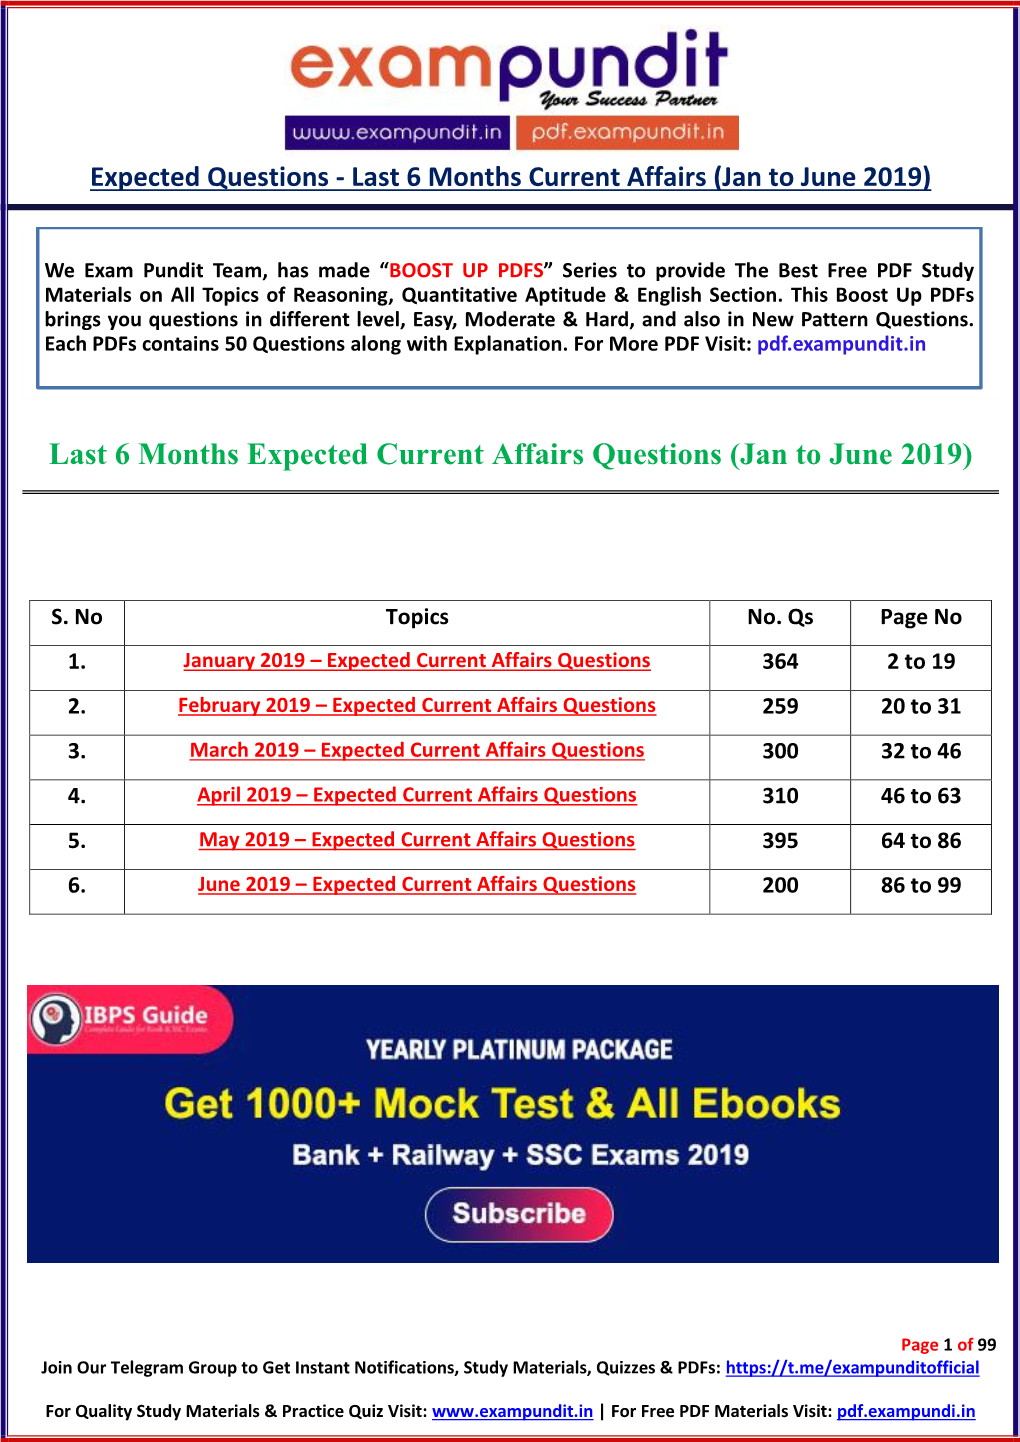 Last 6 Months Expected Current Affairs Questions (Jan to June 2019)